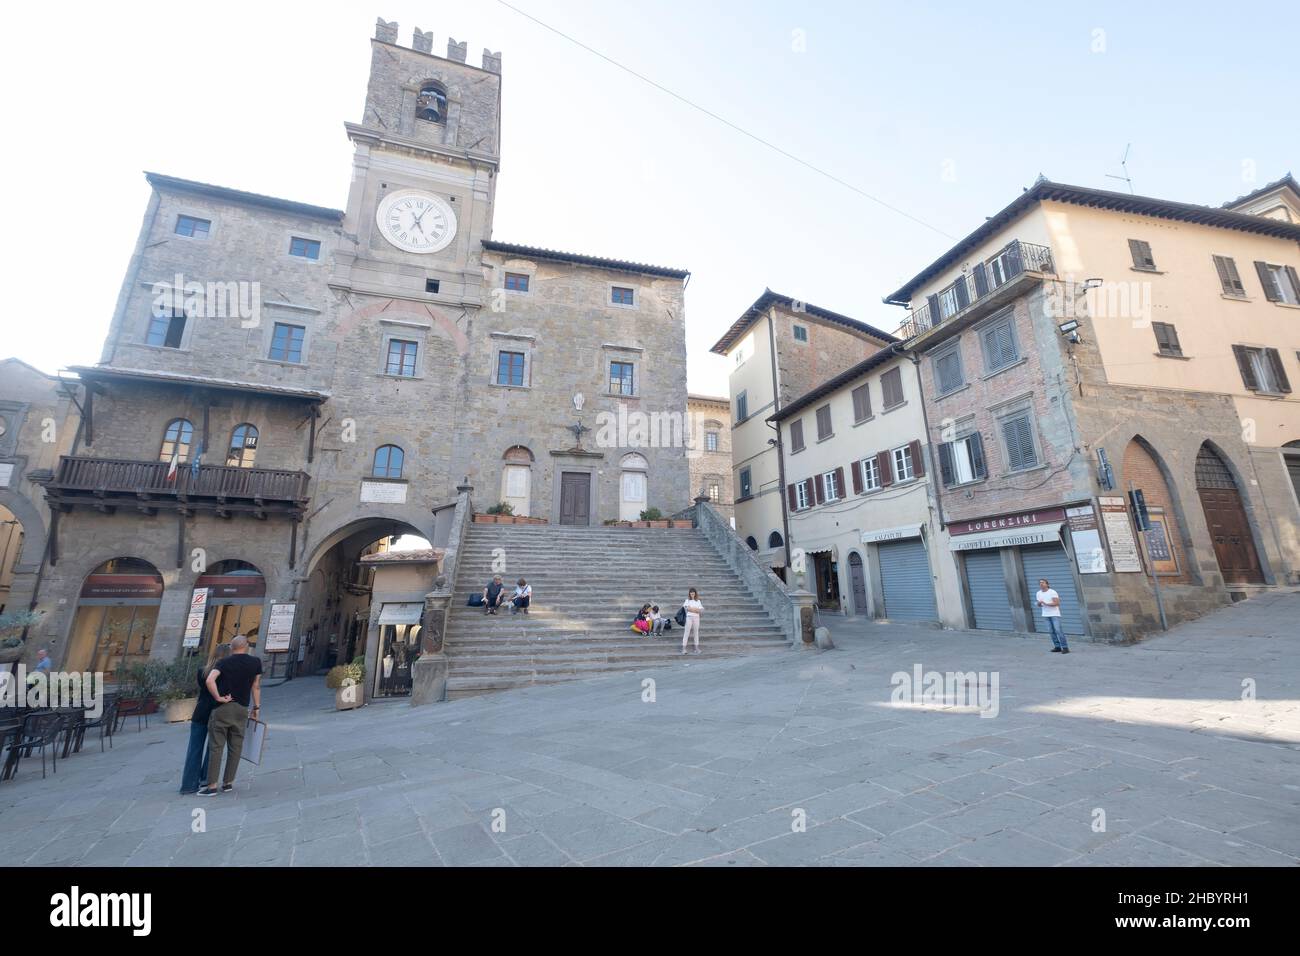 The Town Hall, clearly recognizable with its clock tower and the magnificent access staircase on the facade, Cortona, Italy Stock Photo